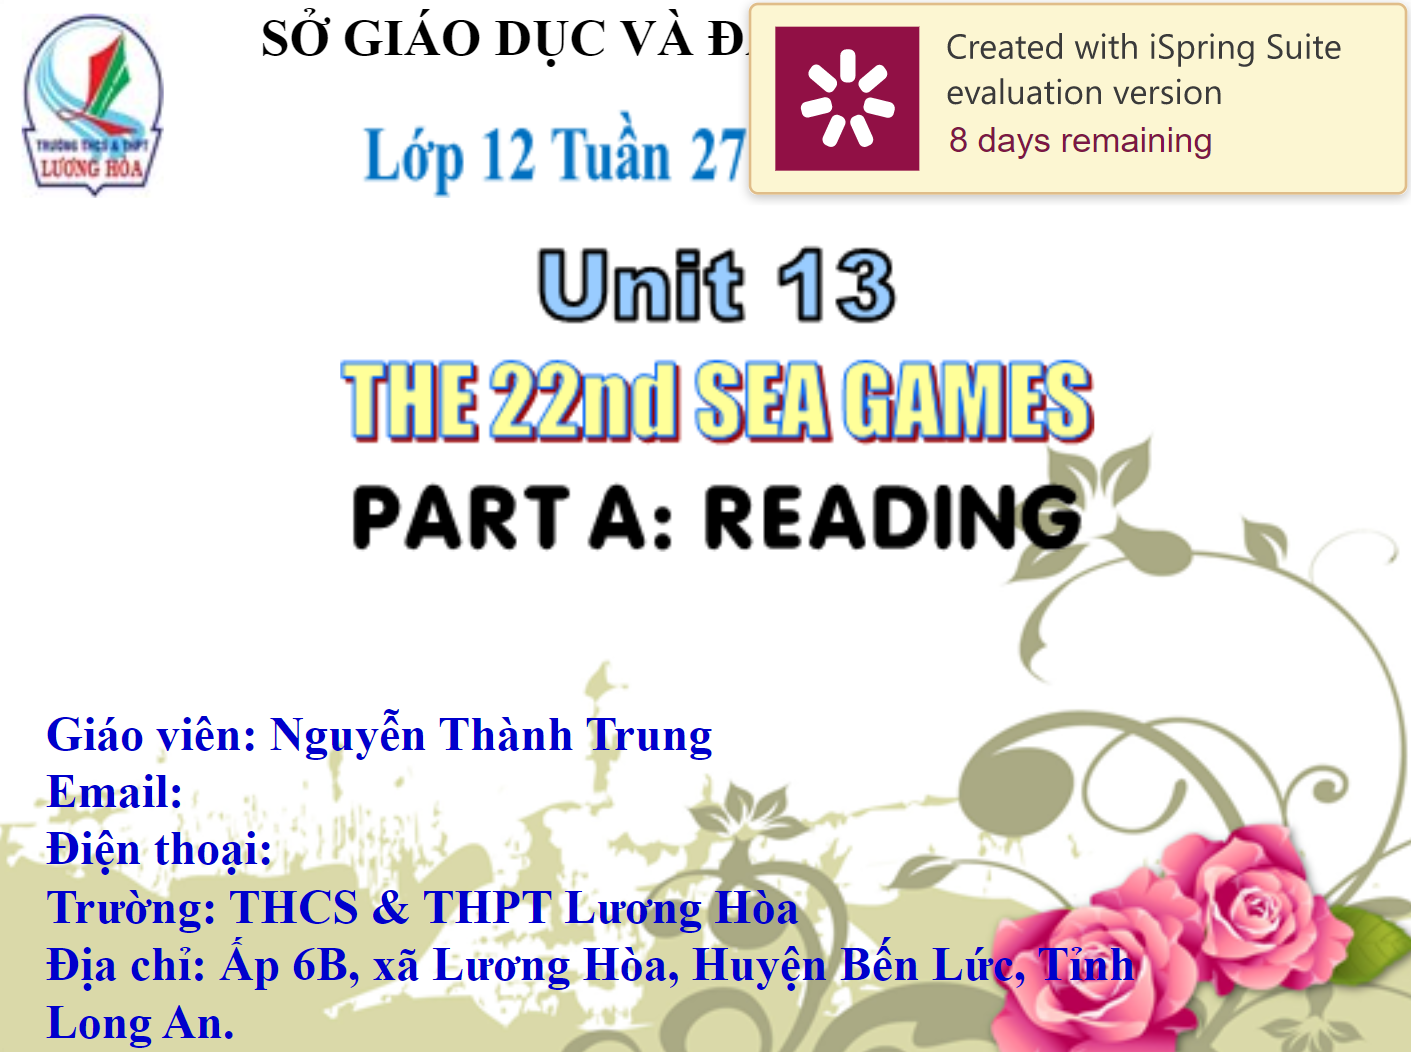 Unit 13: THE 22nd SEA GAMES. PART A: READING